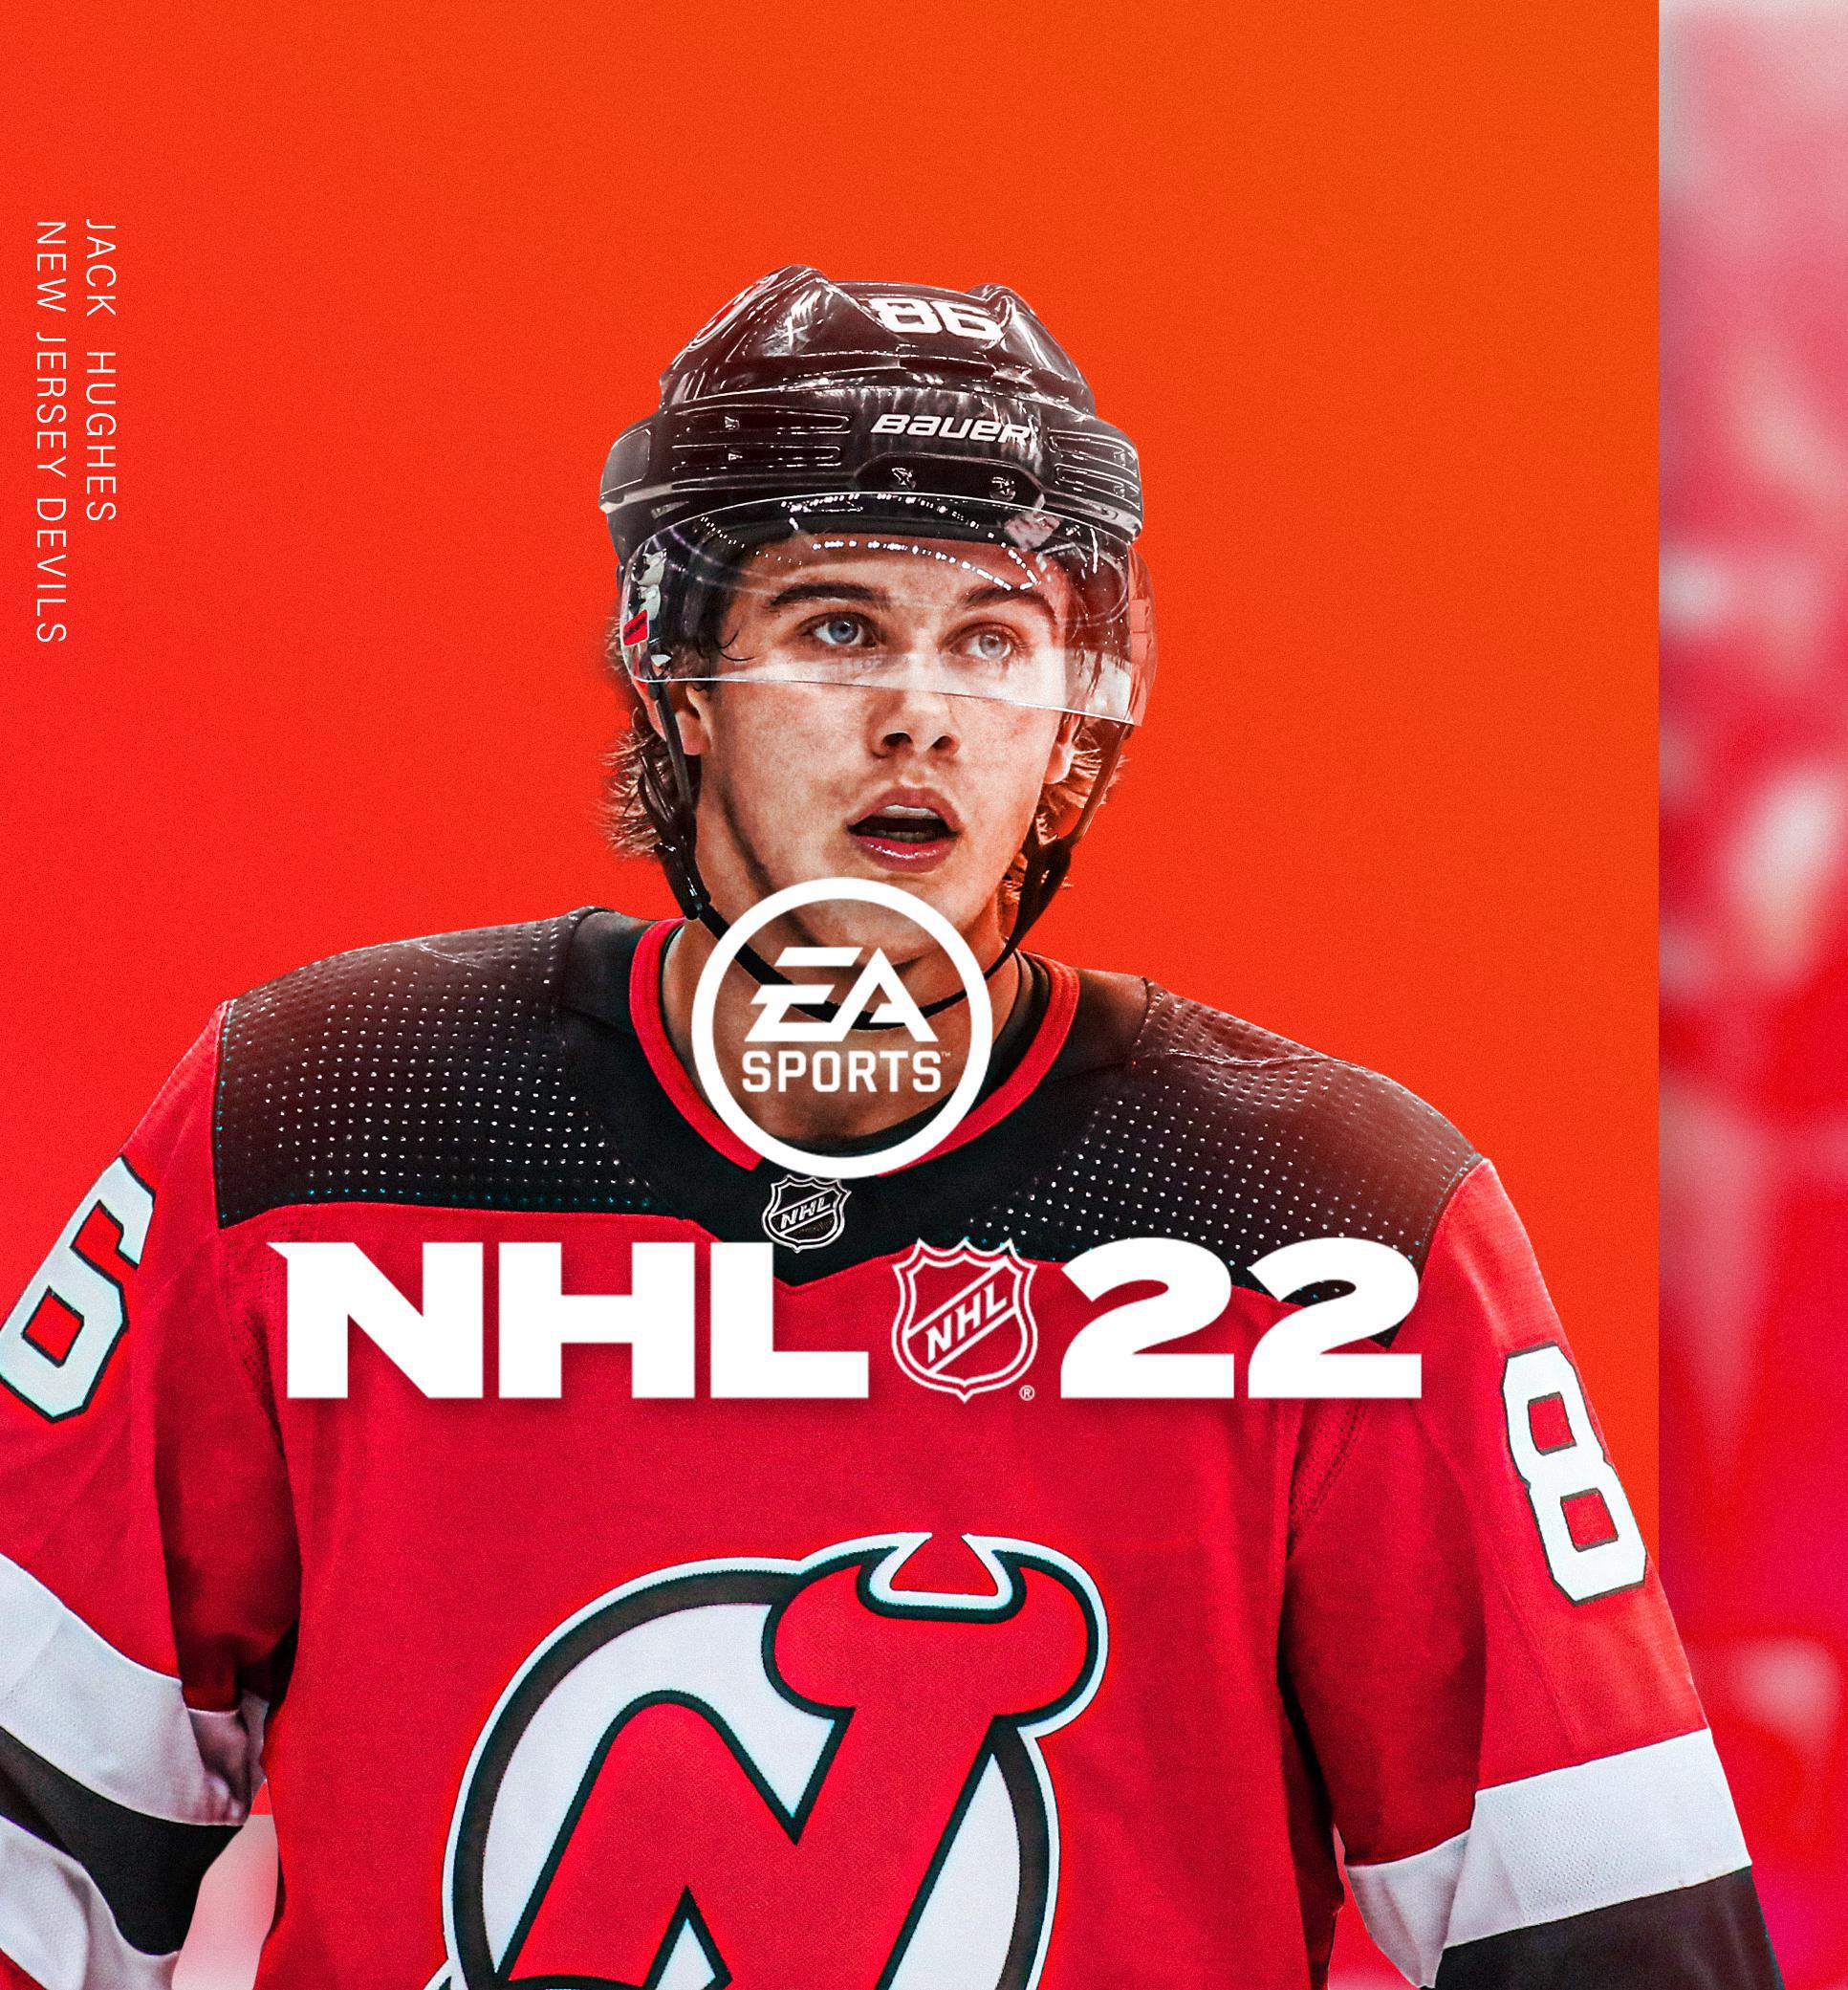 NHL 22 Wallpapers